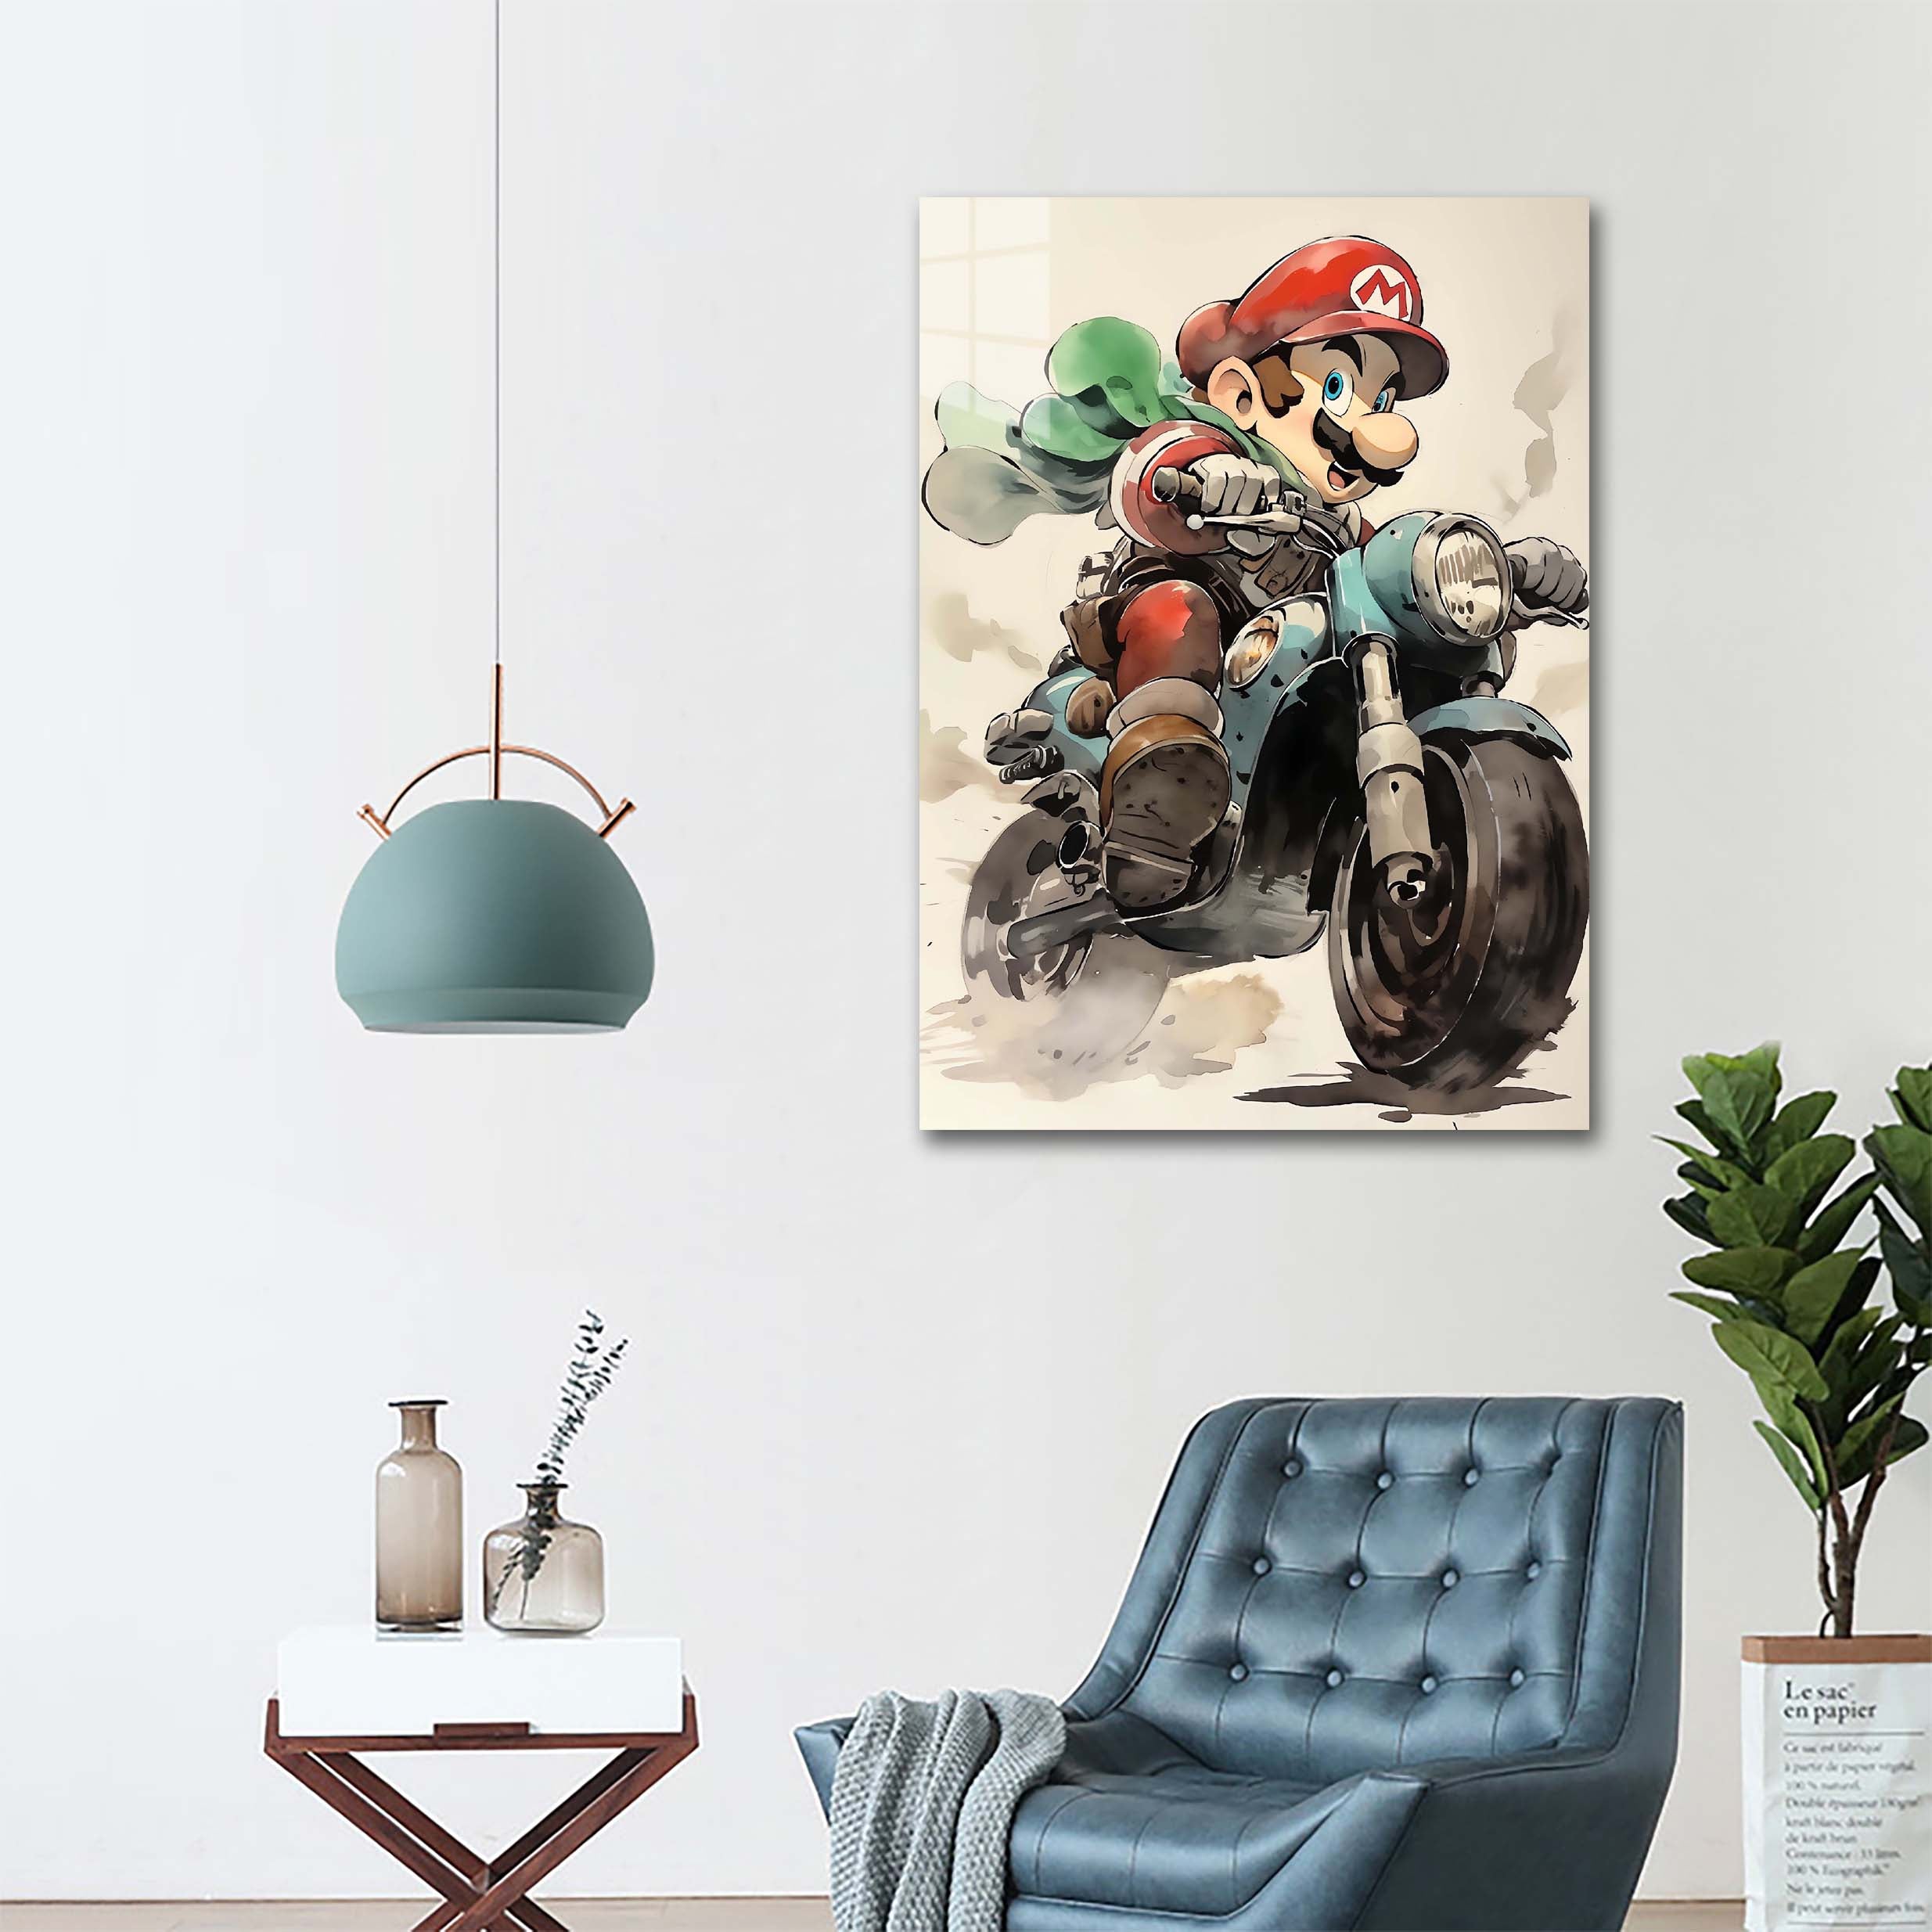 Motorcycle Rider - Mario-designed by @WowPaper